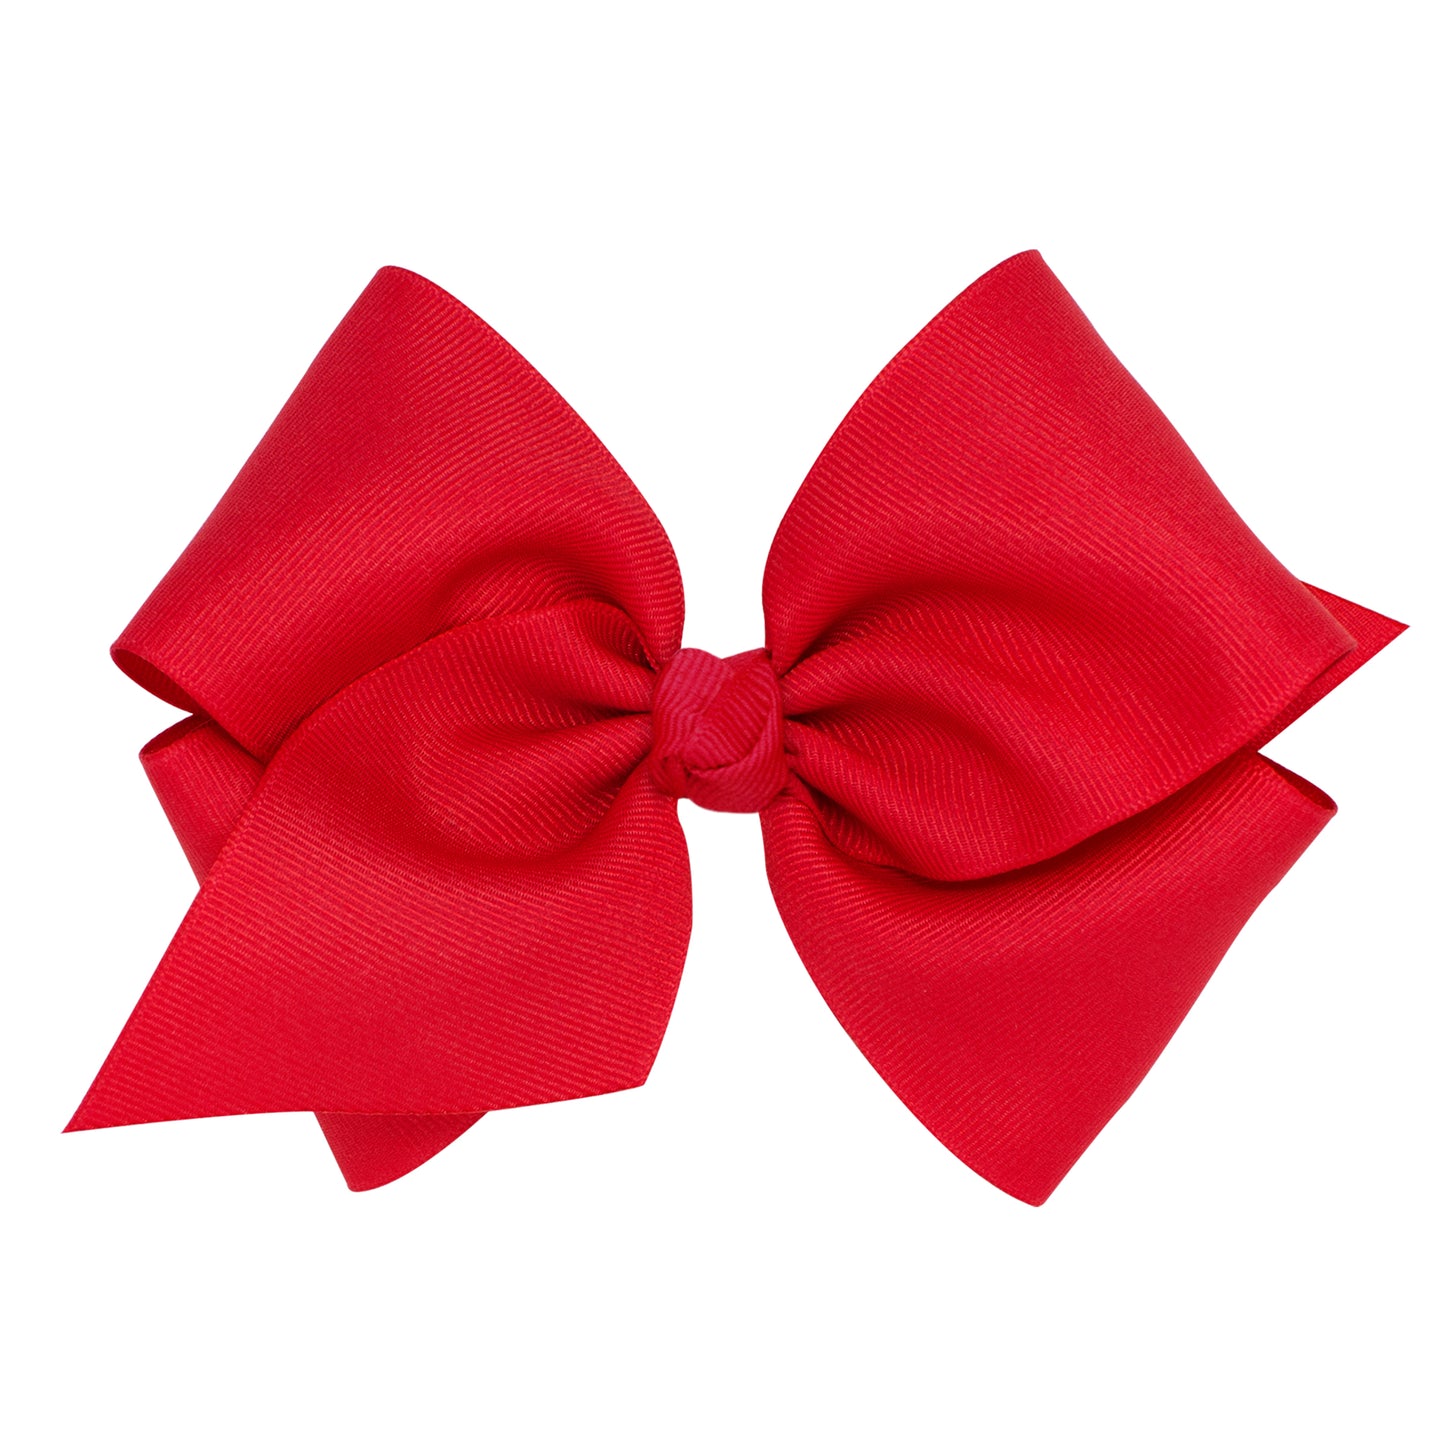 King Grosgrain Hair Bow with Center Knot - Red